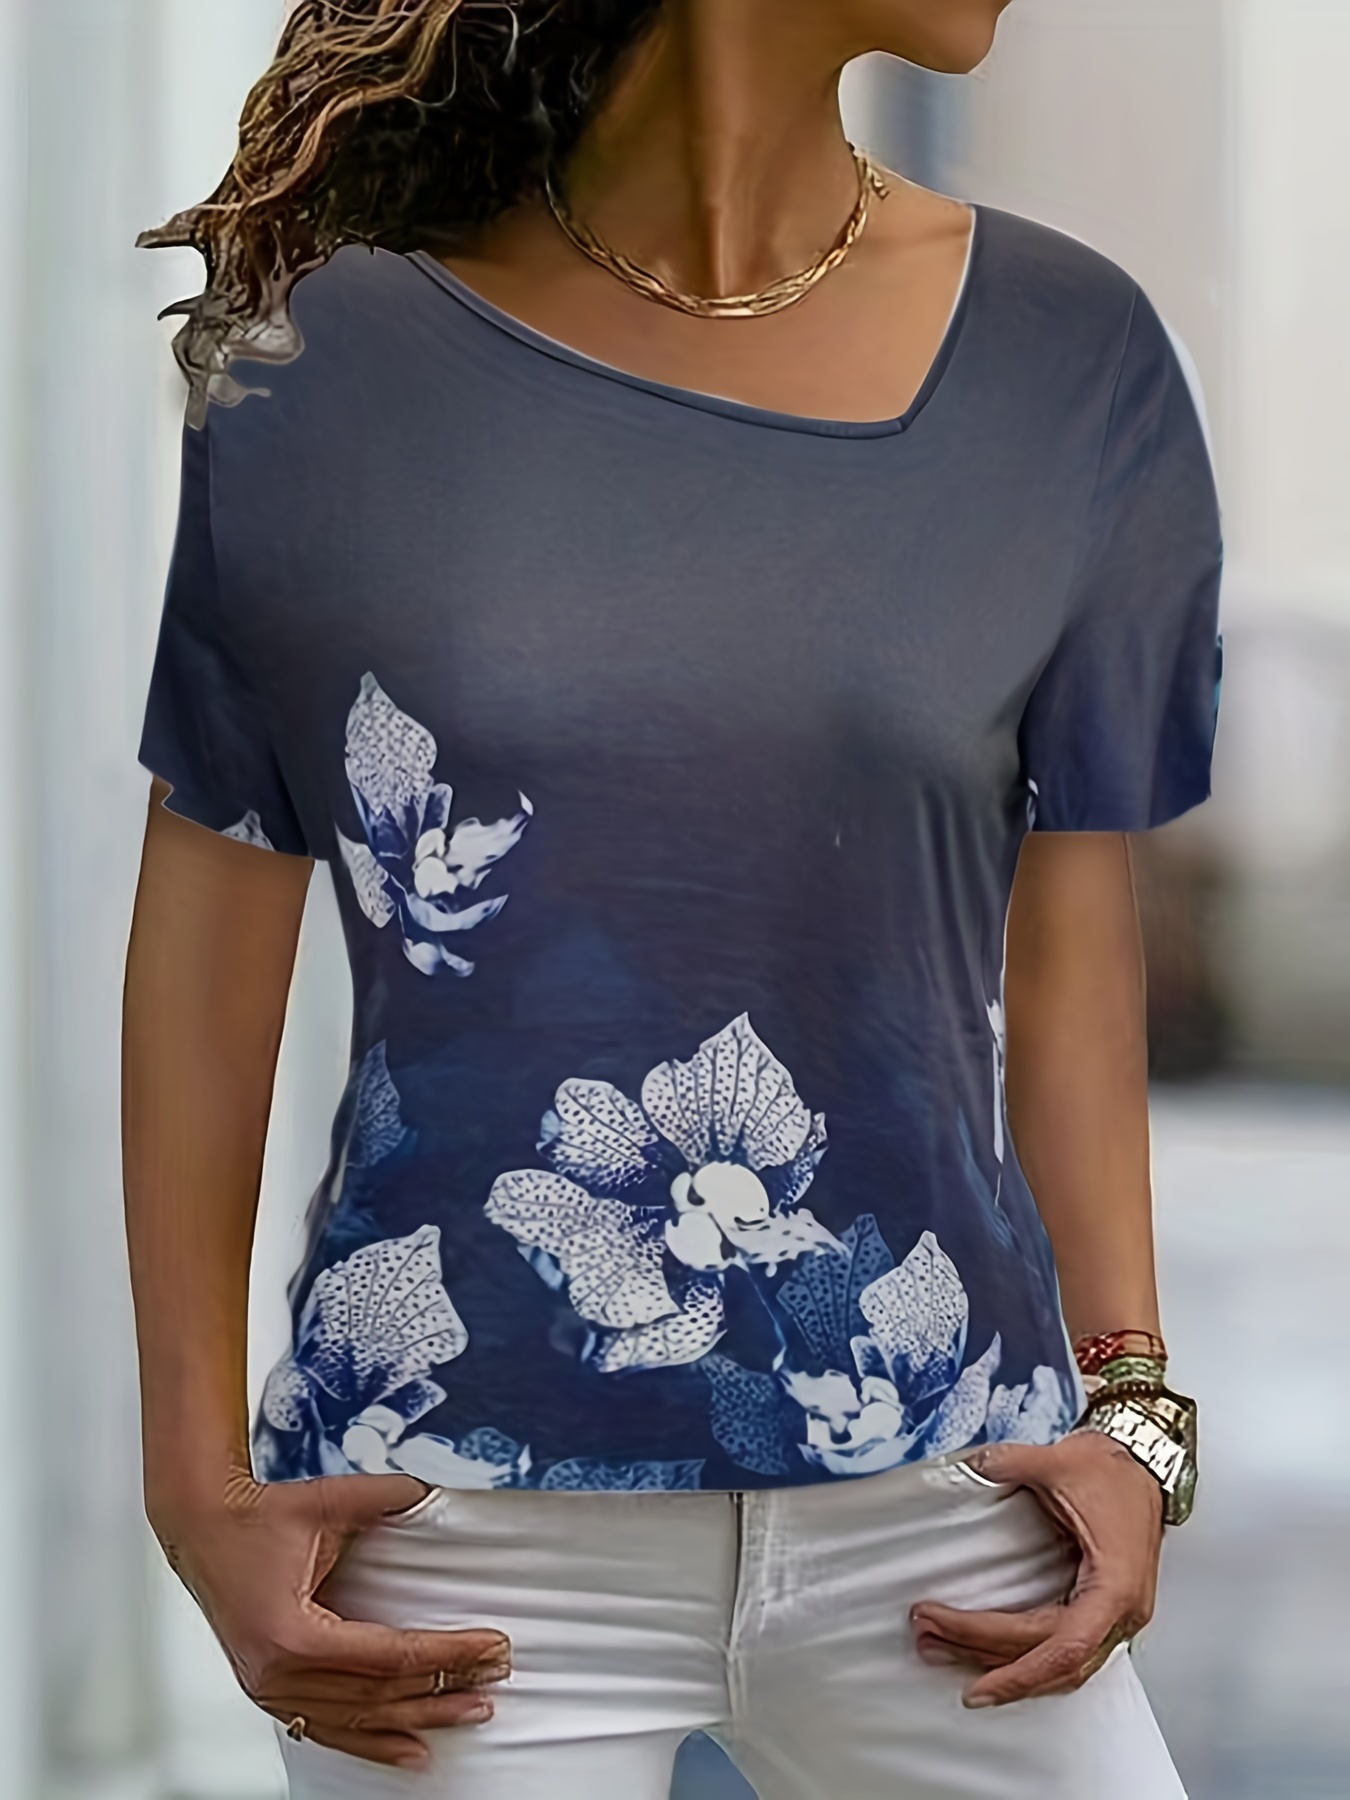 XFLWAM Womens Floral Print Crew Neck T-Shirt Fitted Beach Aesthetic Summer  Tops Short Sleeve Shirt Comfy Blouse Casual Tunic Graphic Blue S 